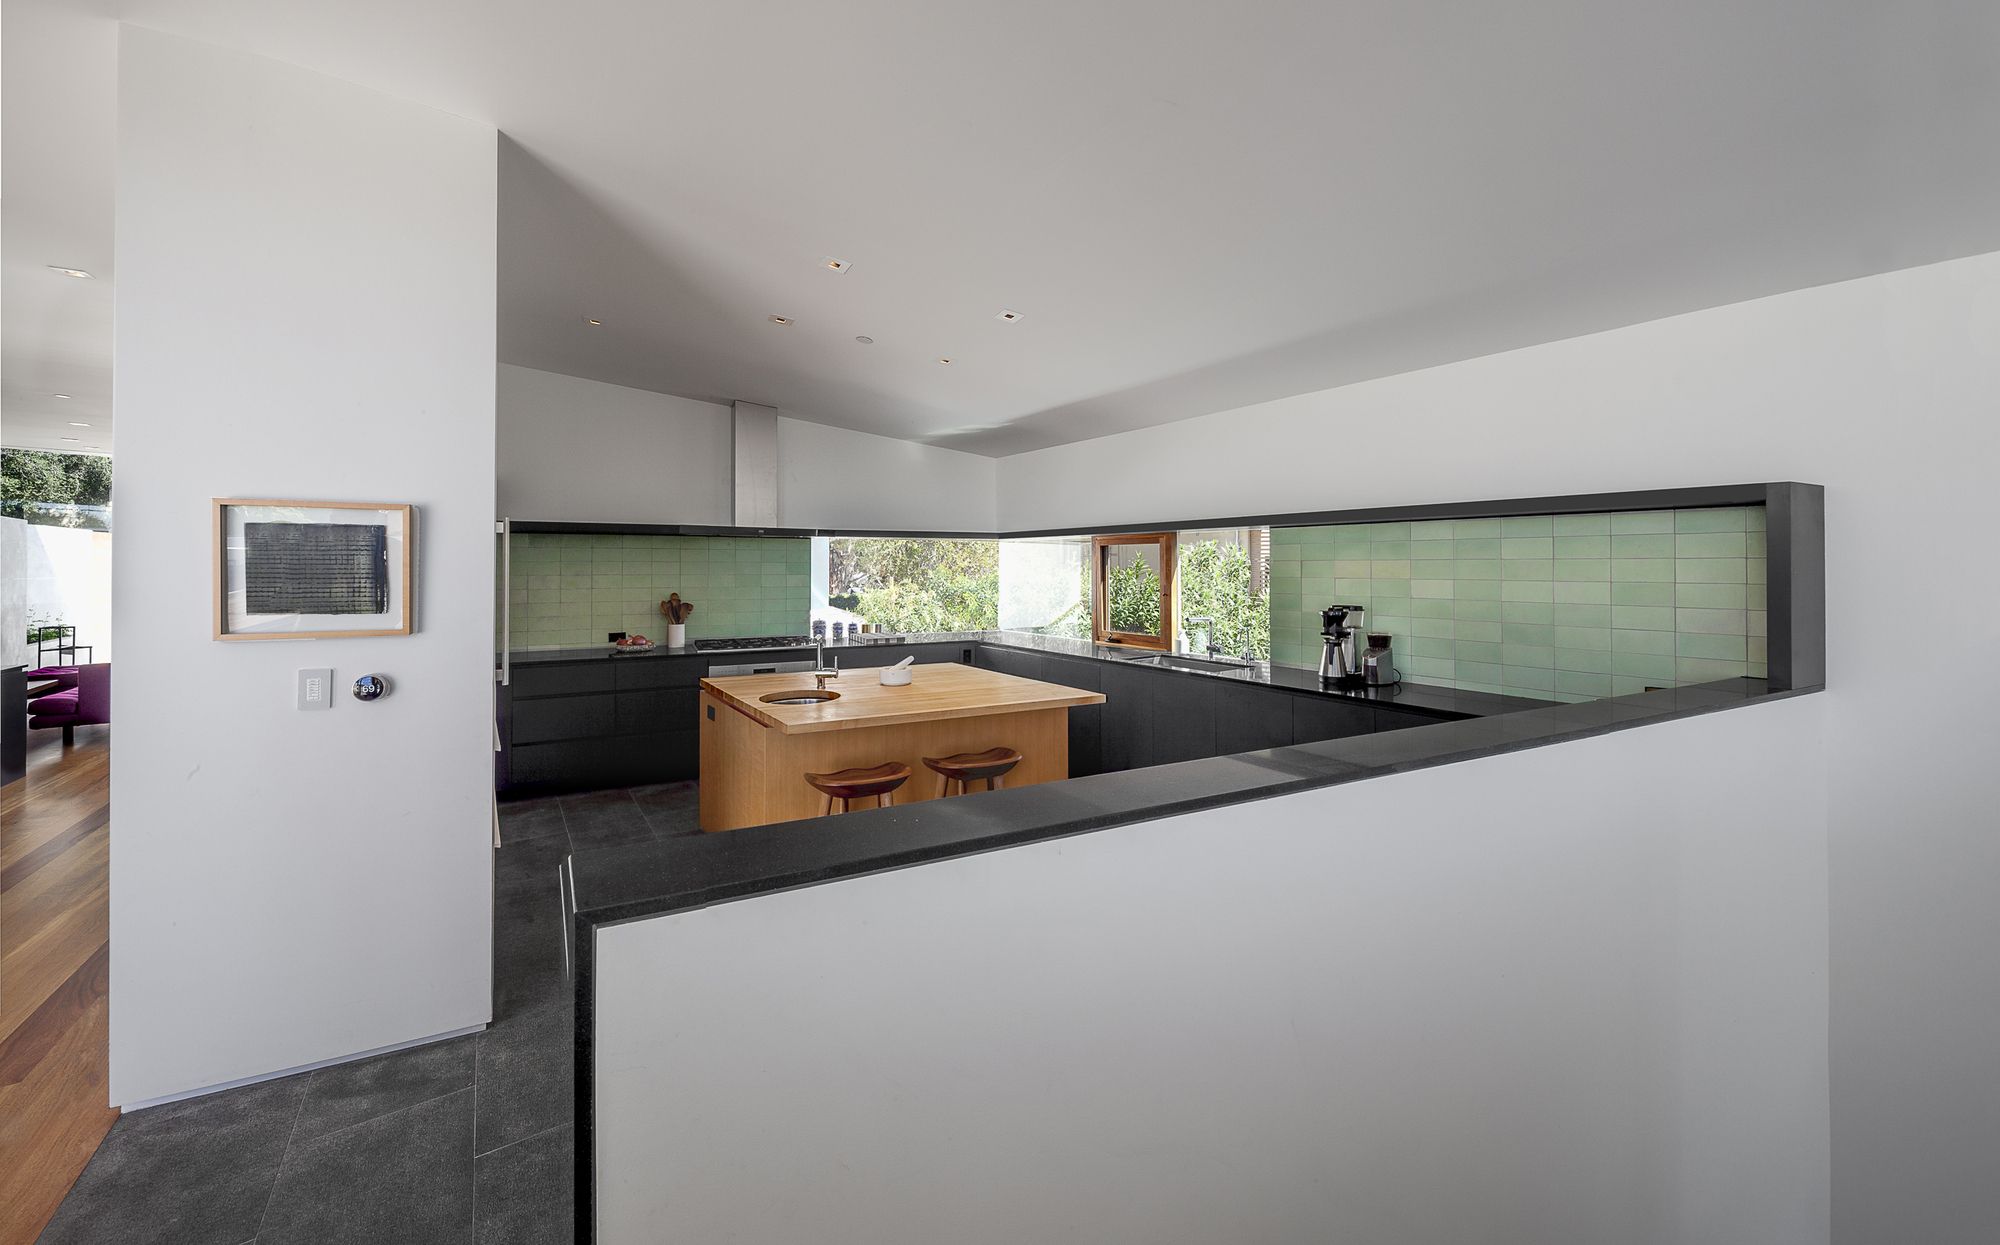 minimalist kitchen of a modern house, brown island surrounded by black cabinets